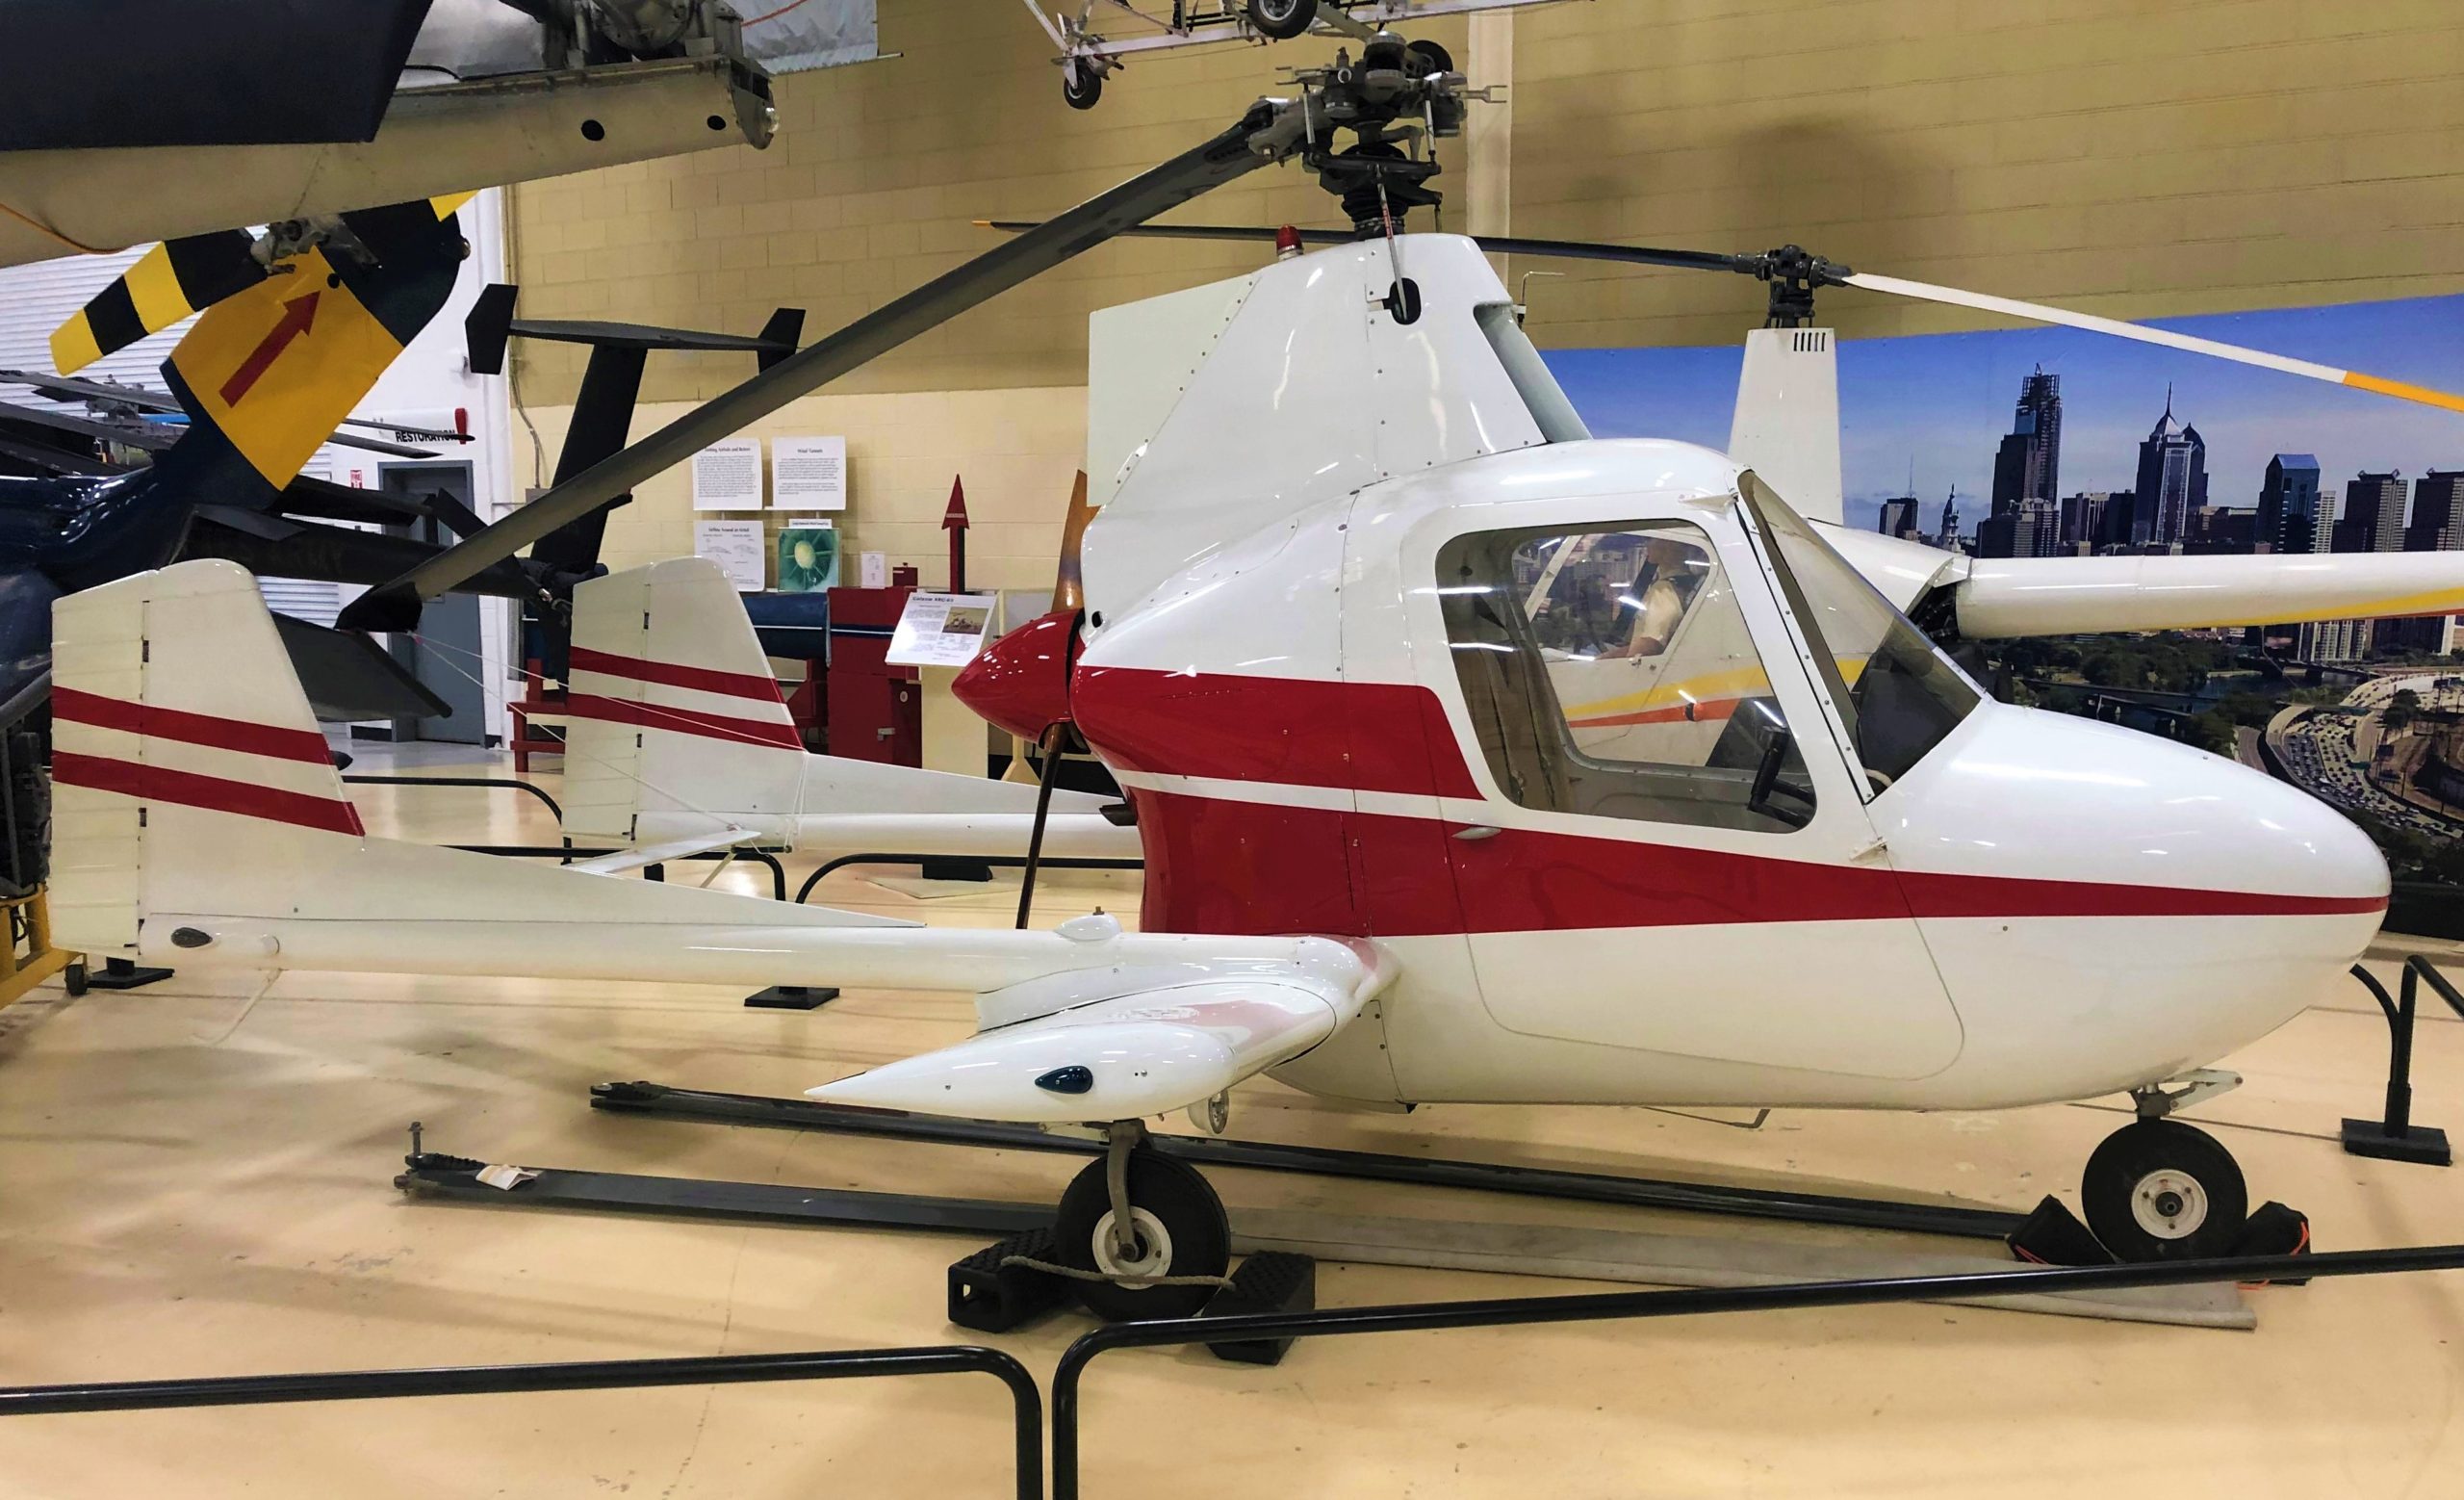 McCulloch J-2 Gyroplane - American Helicopter Museum & Education ...